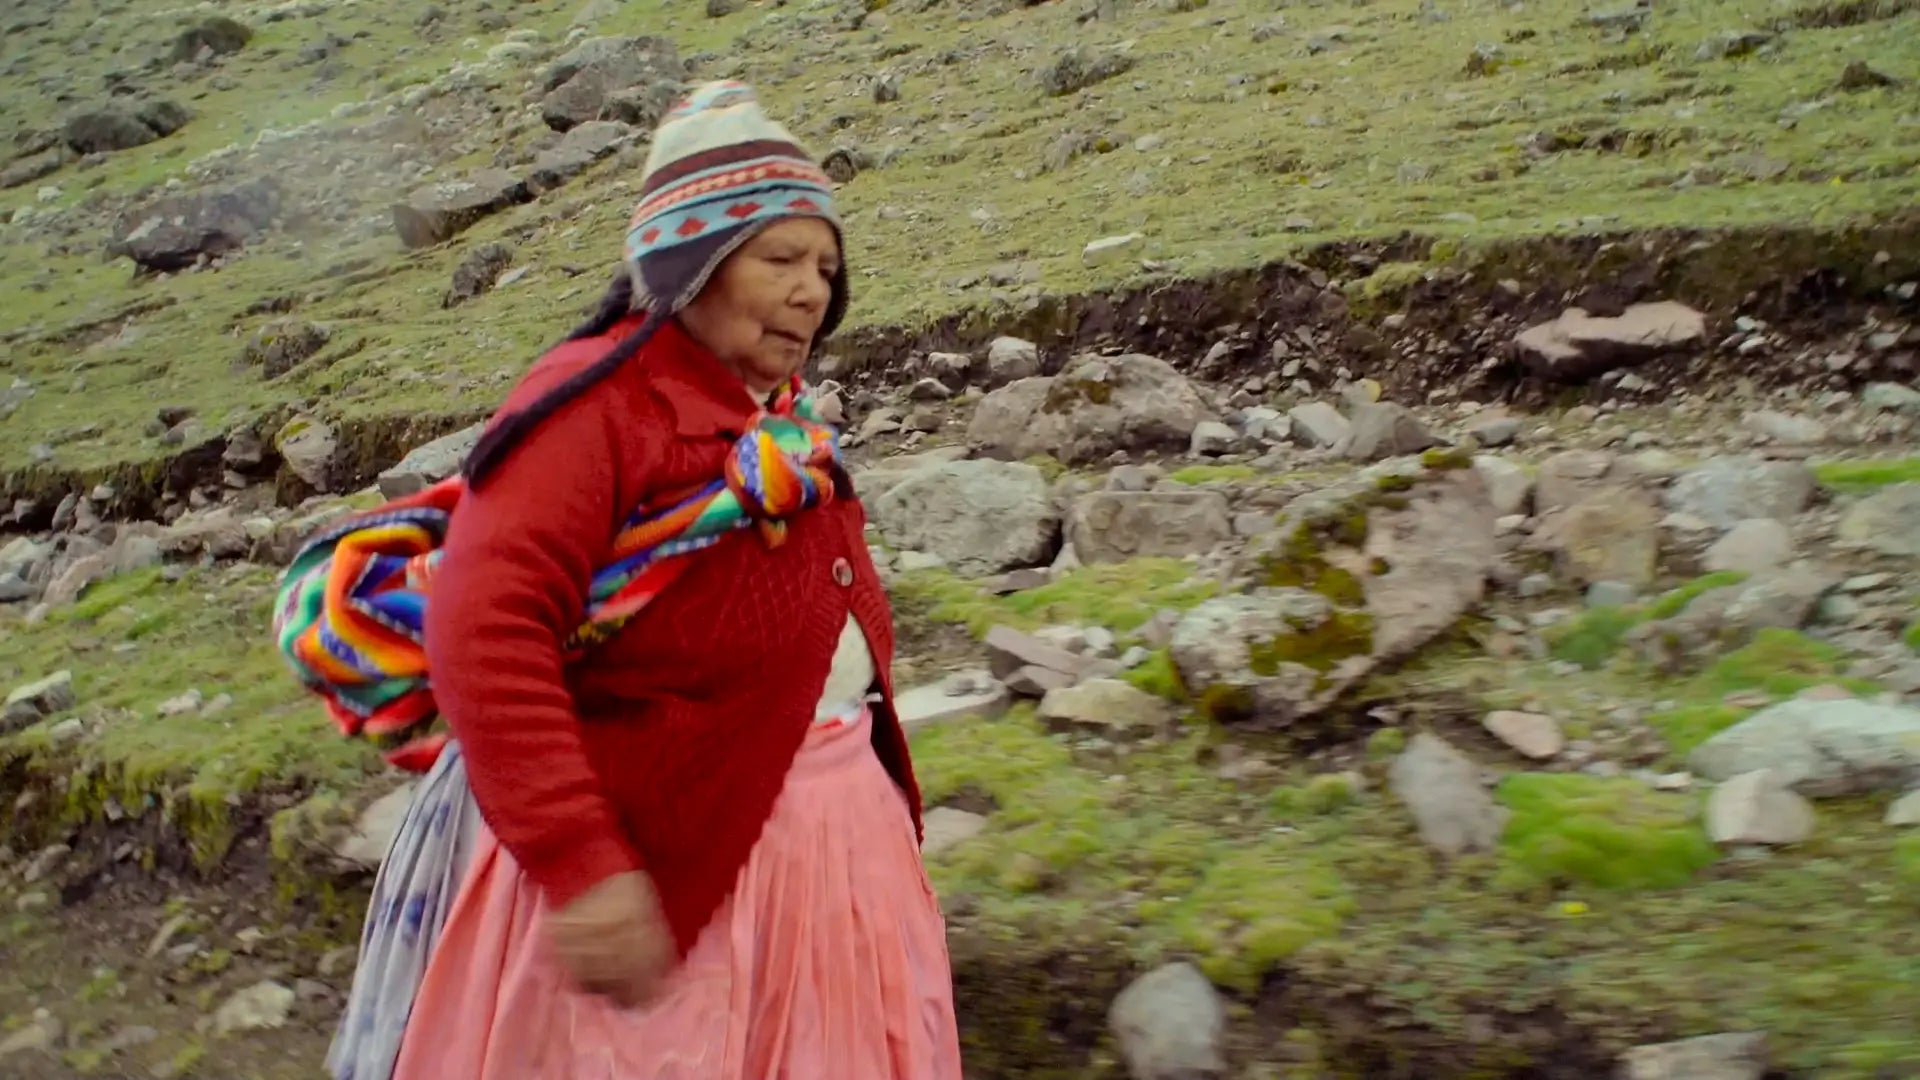 Mama Irene: Healer of the Andes